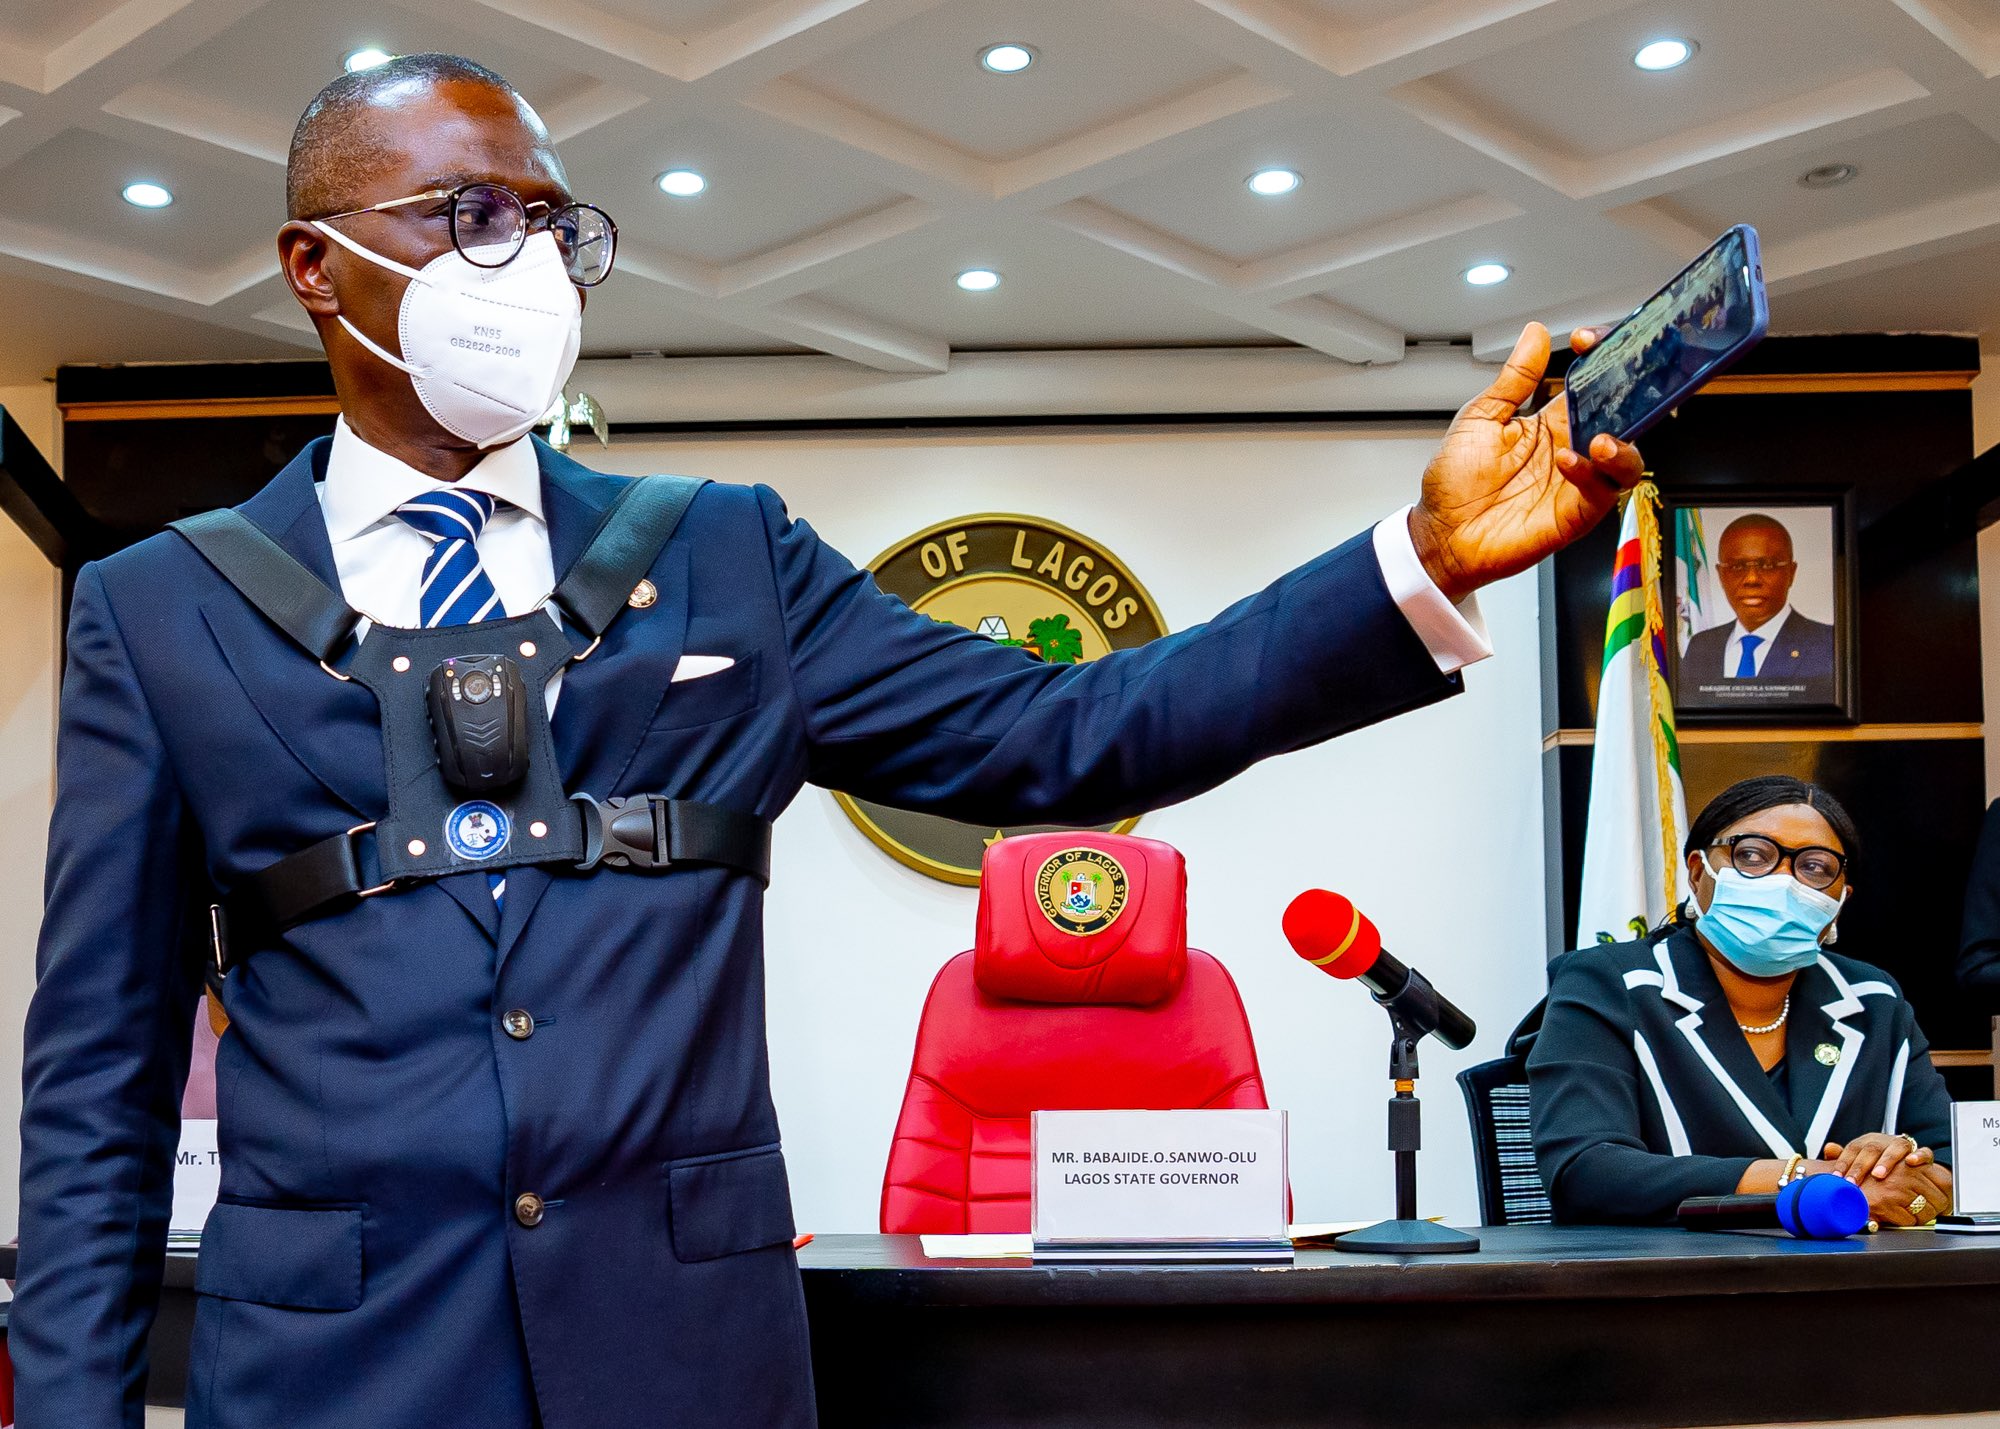 Lagos Law Enforcement Officers To Use Body Camera, Says Sanwo-Olu